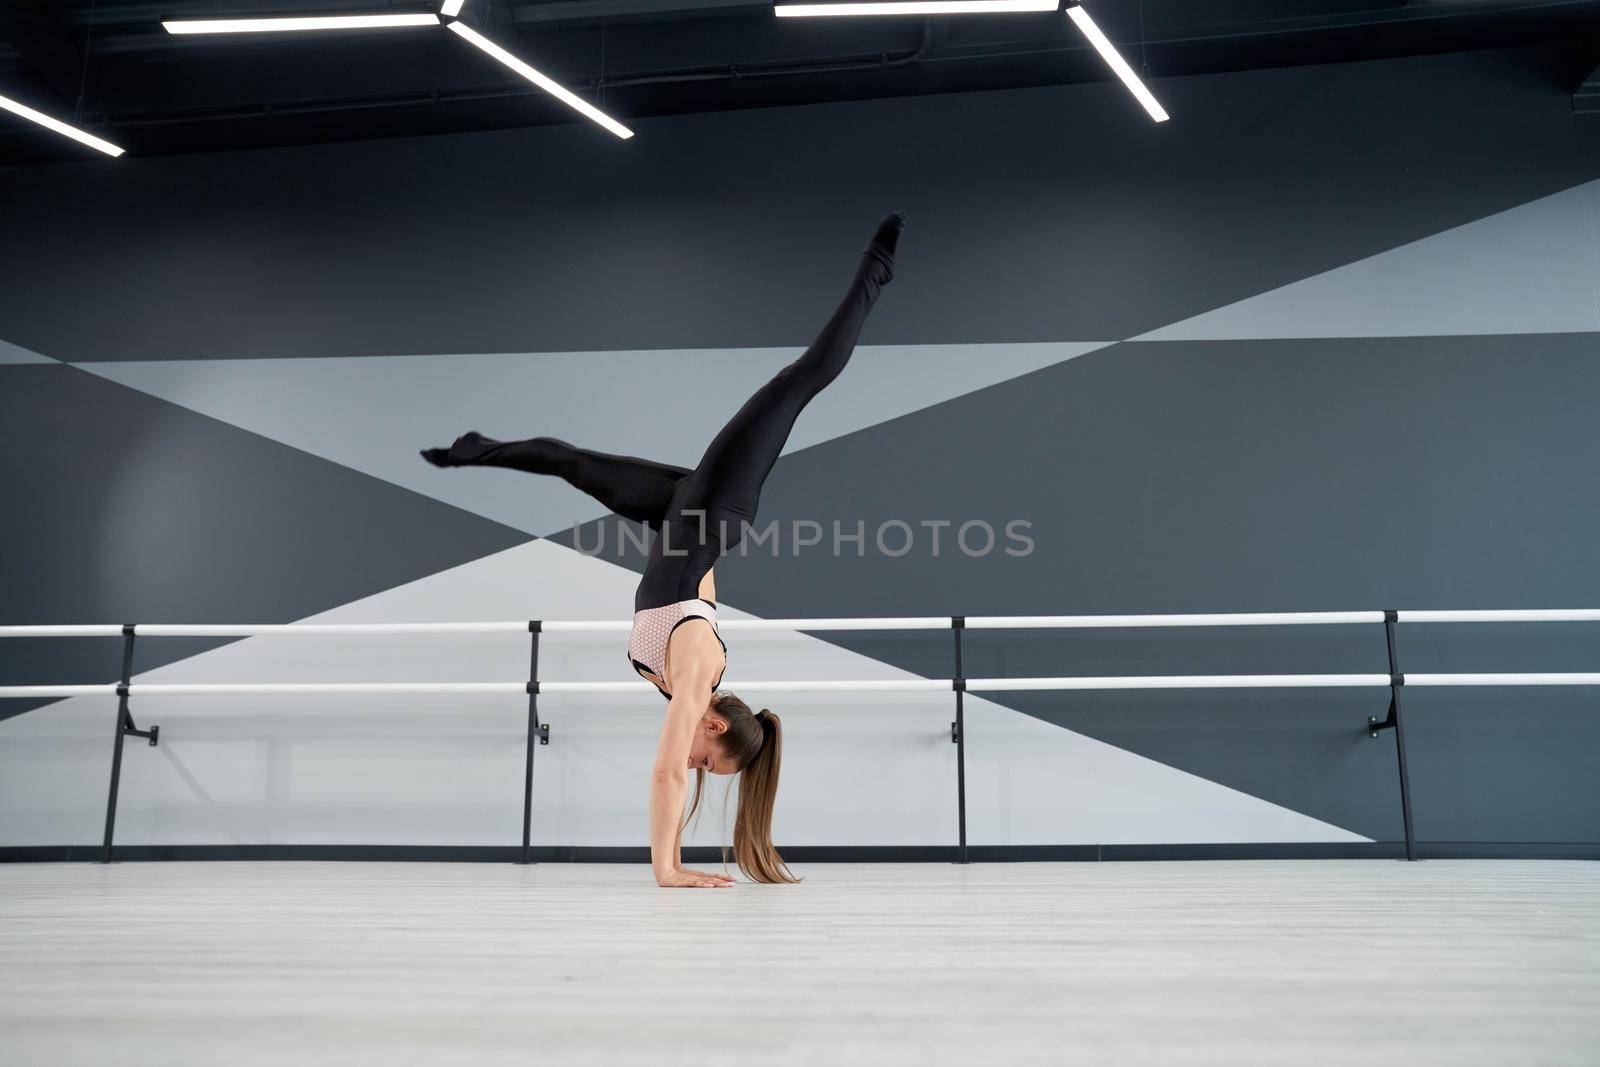 Strong fit woman in tight sportswear standing on arms and practicing split in air. Side view of flexible female dancer training before competition in big empty dance hall with ballet handrails.